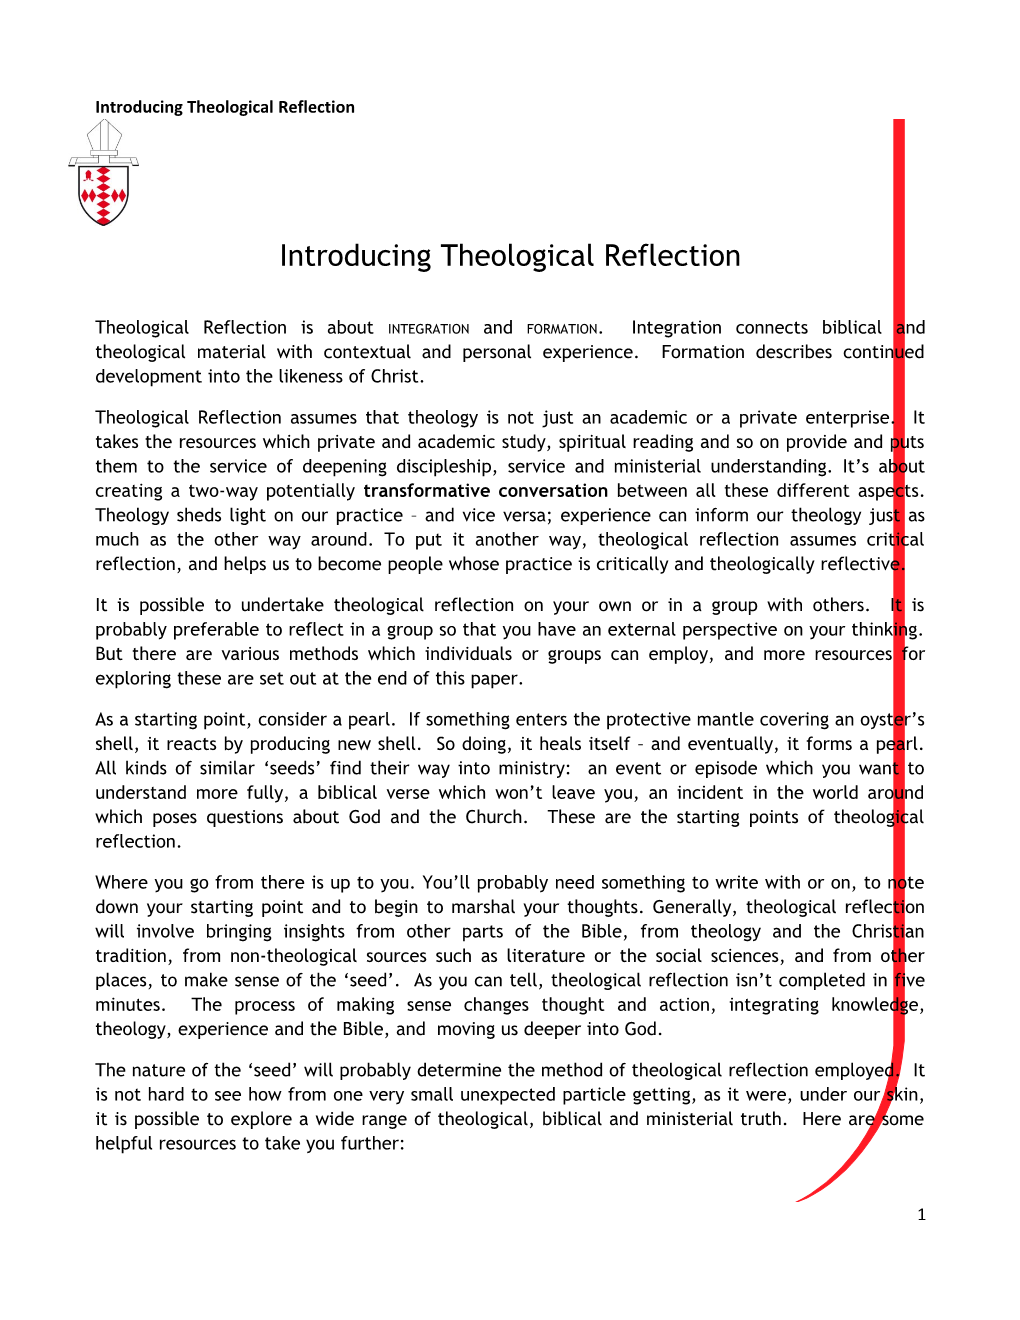 Introducing Theological Reflection